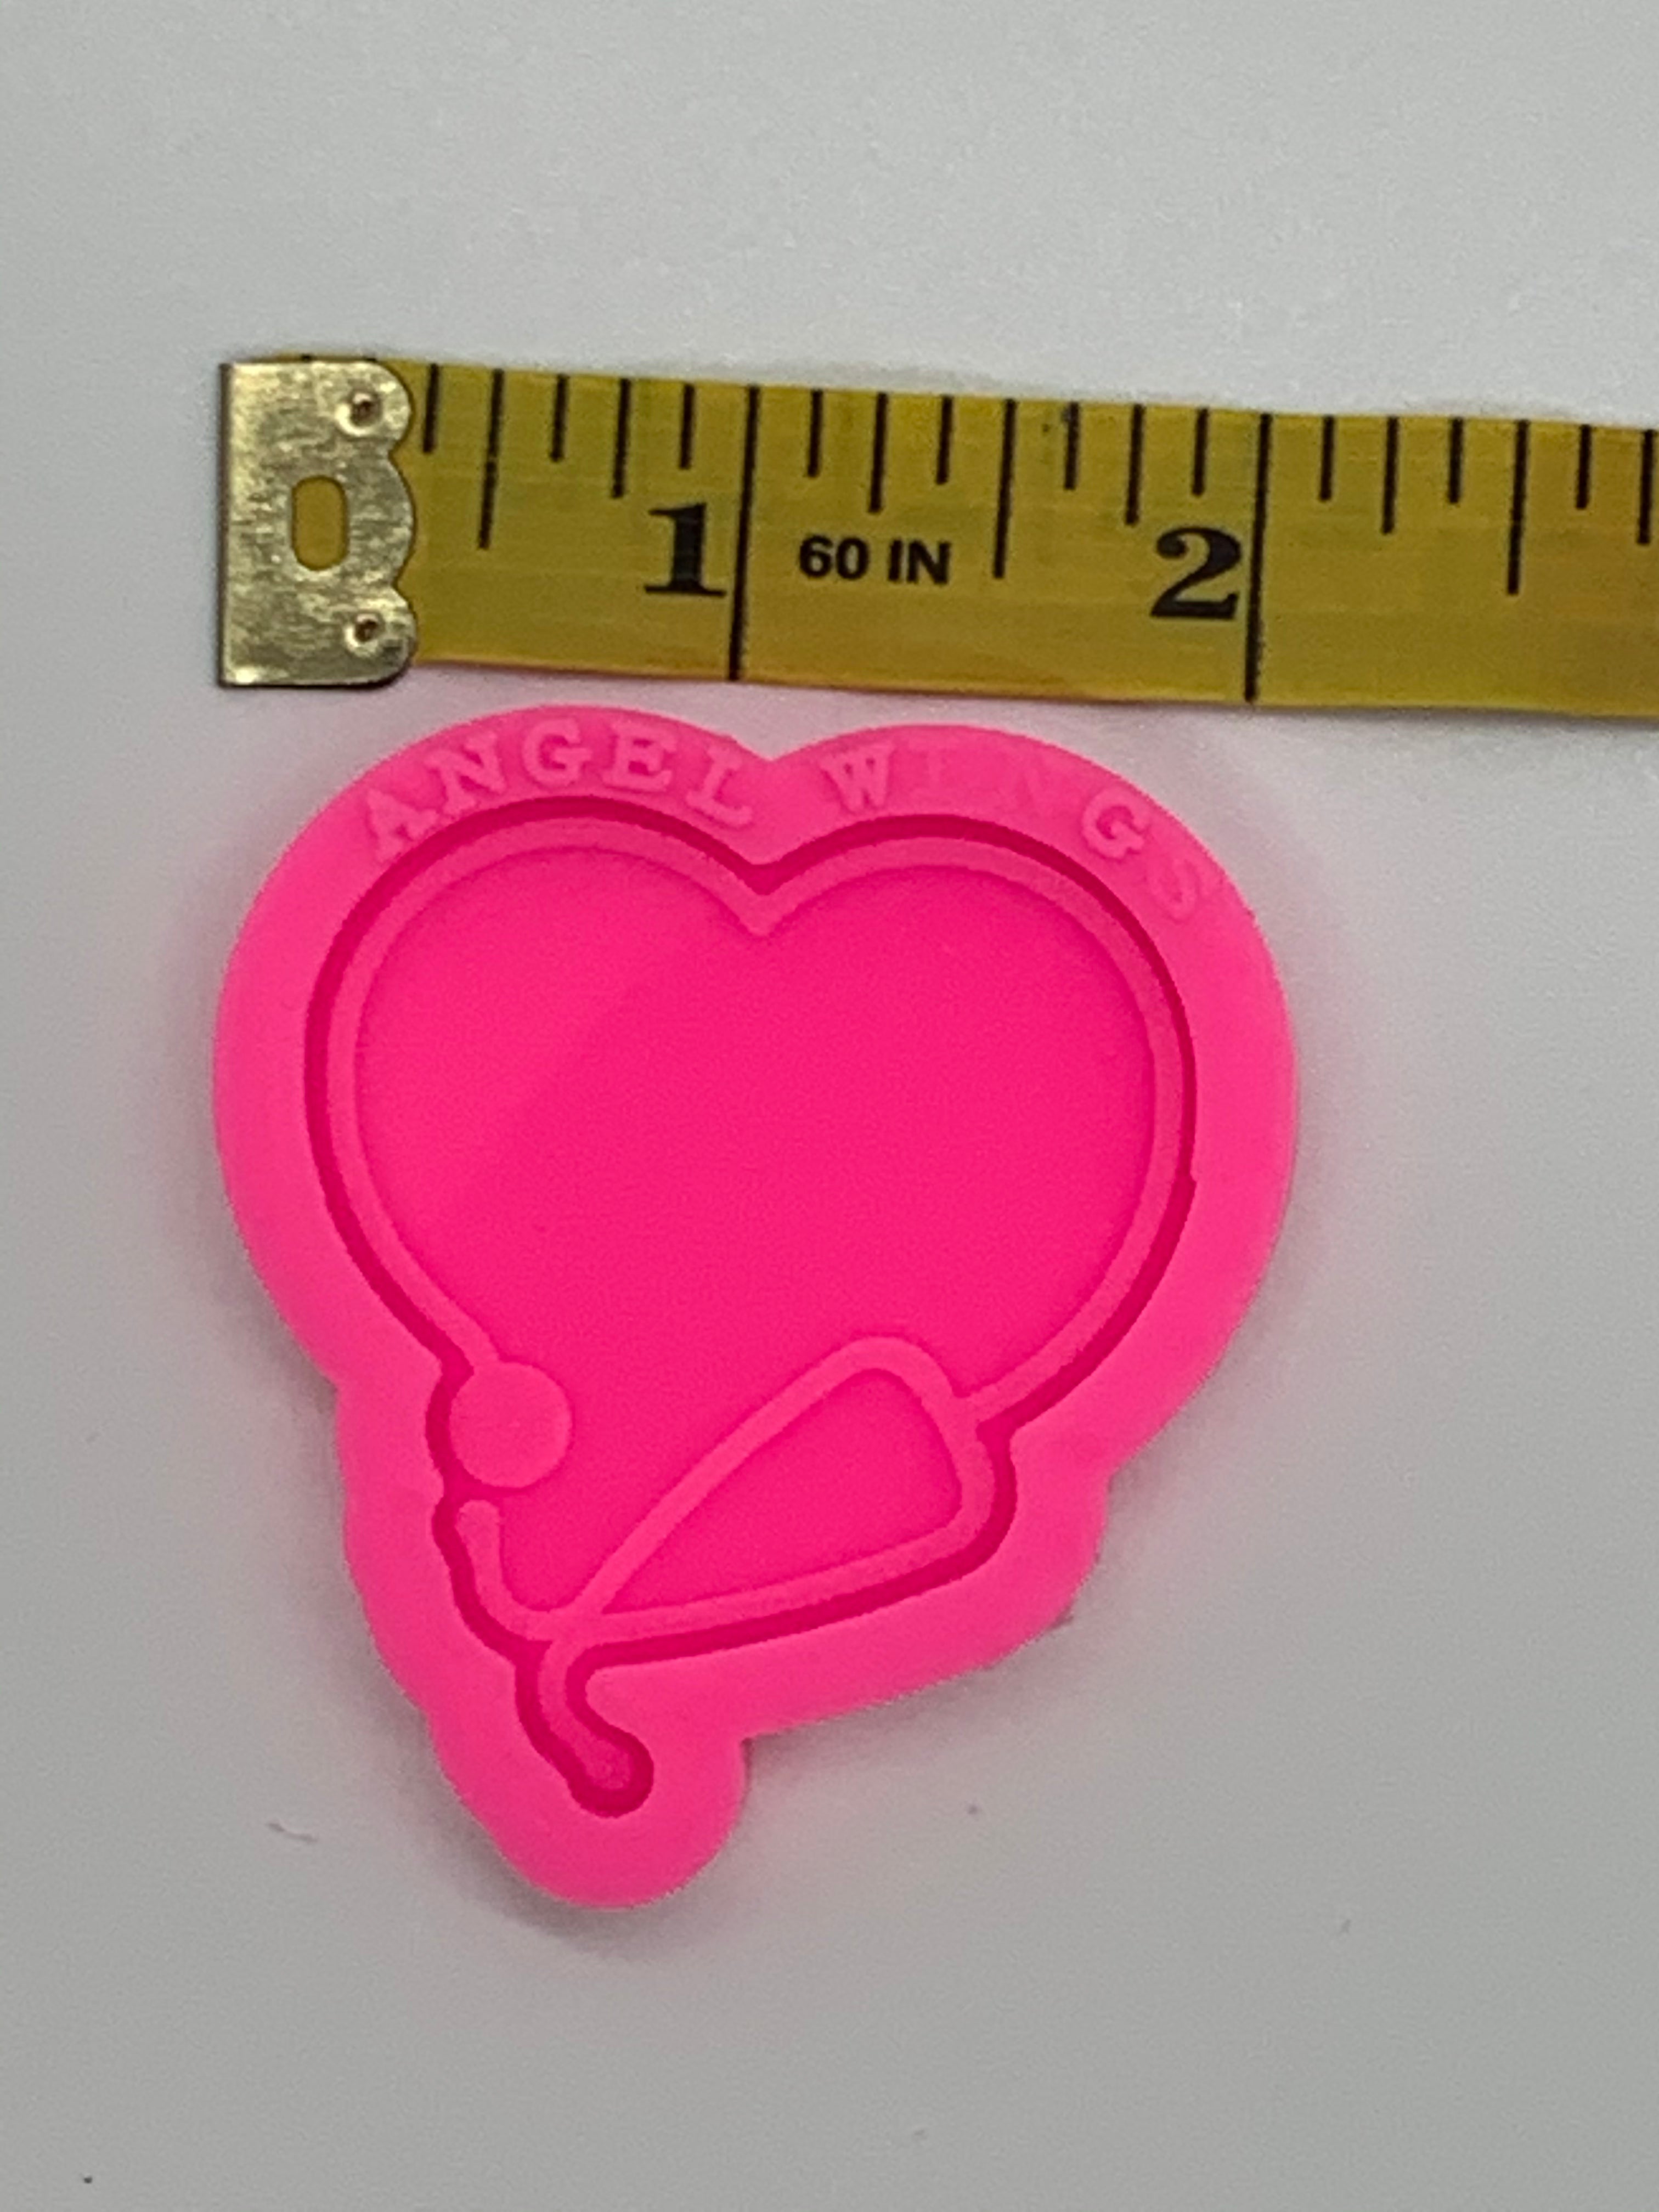 Stethoscope Heart Shiny Silicone Mold for Epoxy Resin Crafts